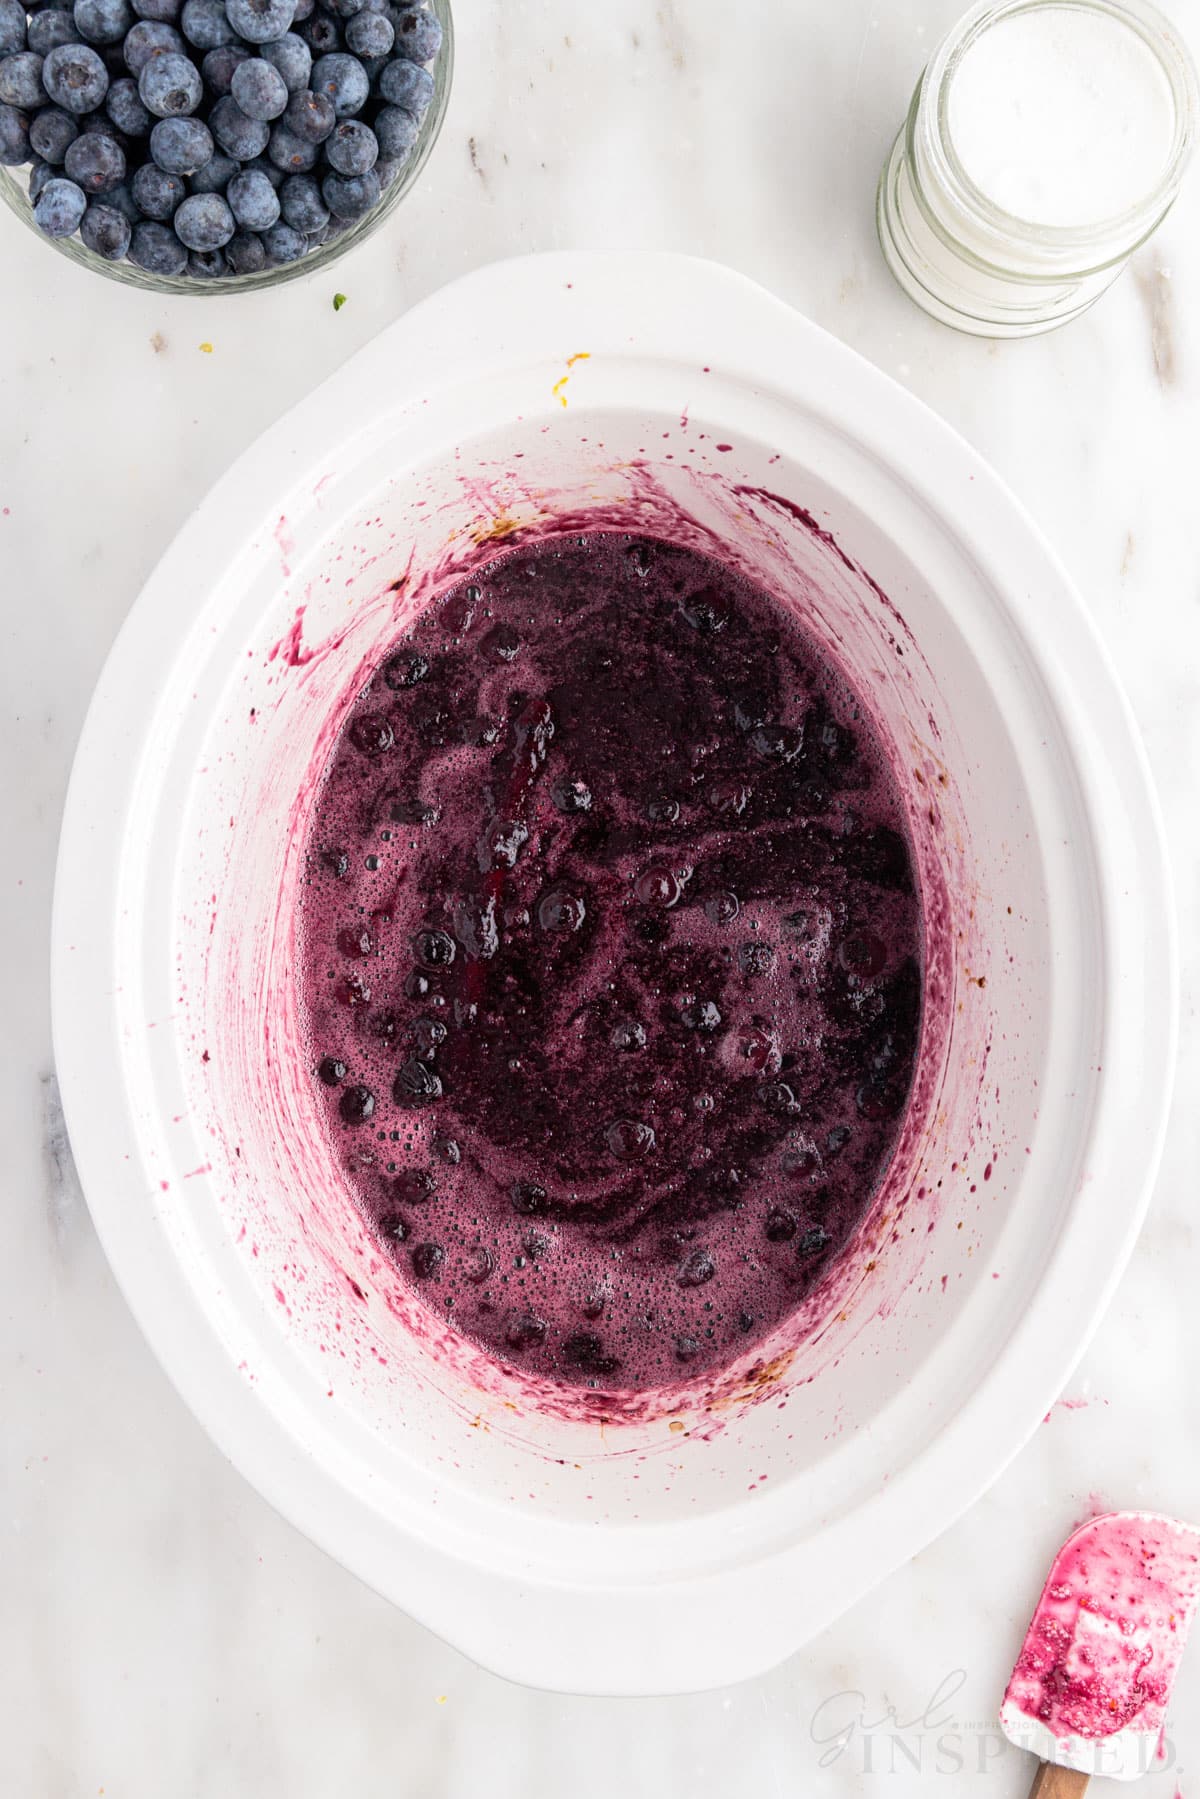 Blueberry Butter after being blended with immersion blender.